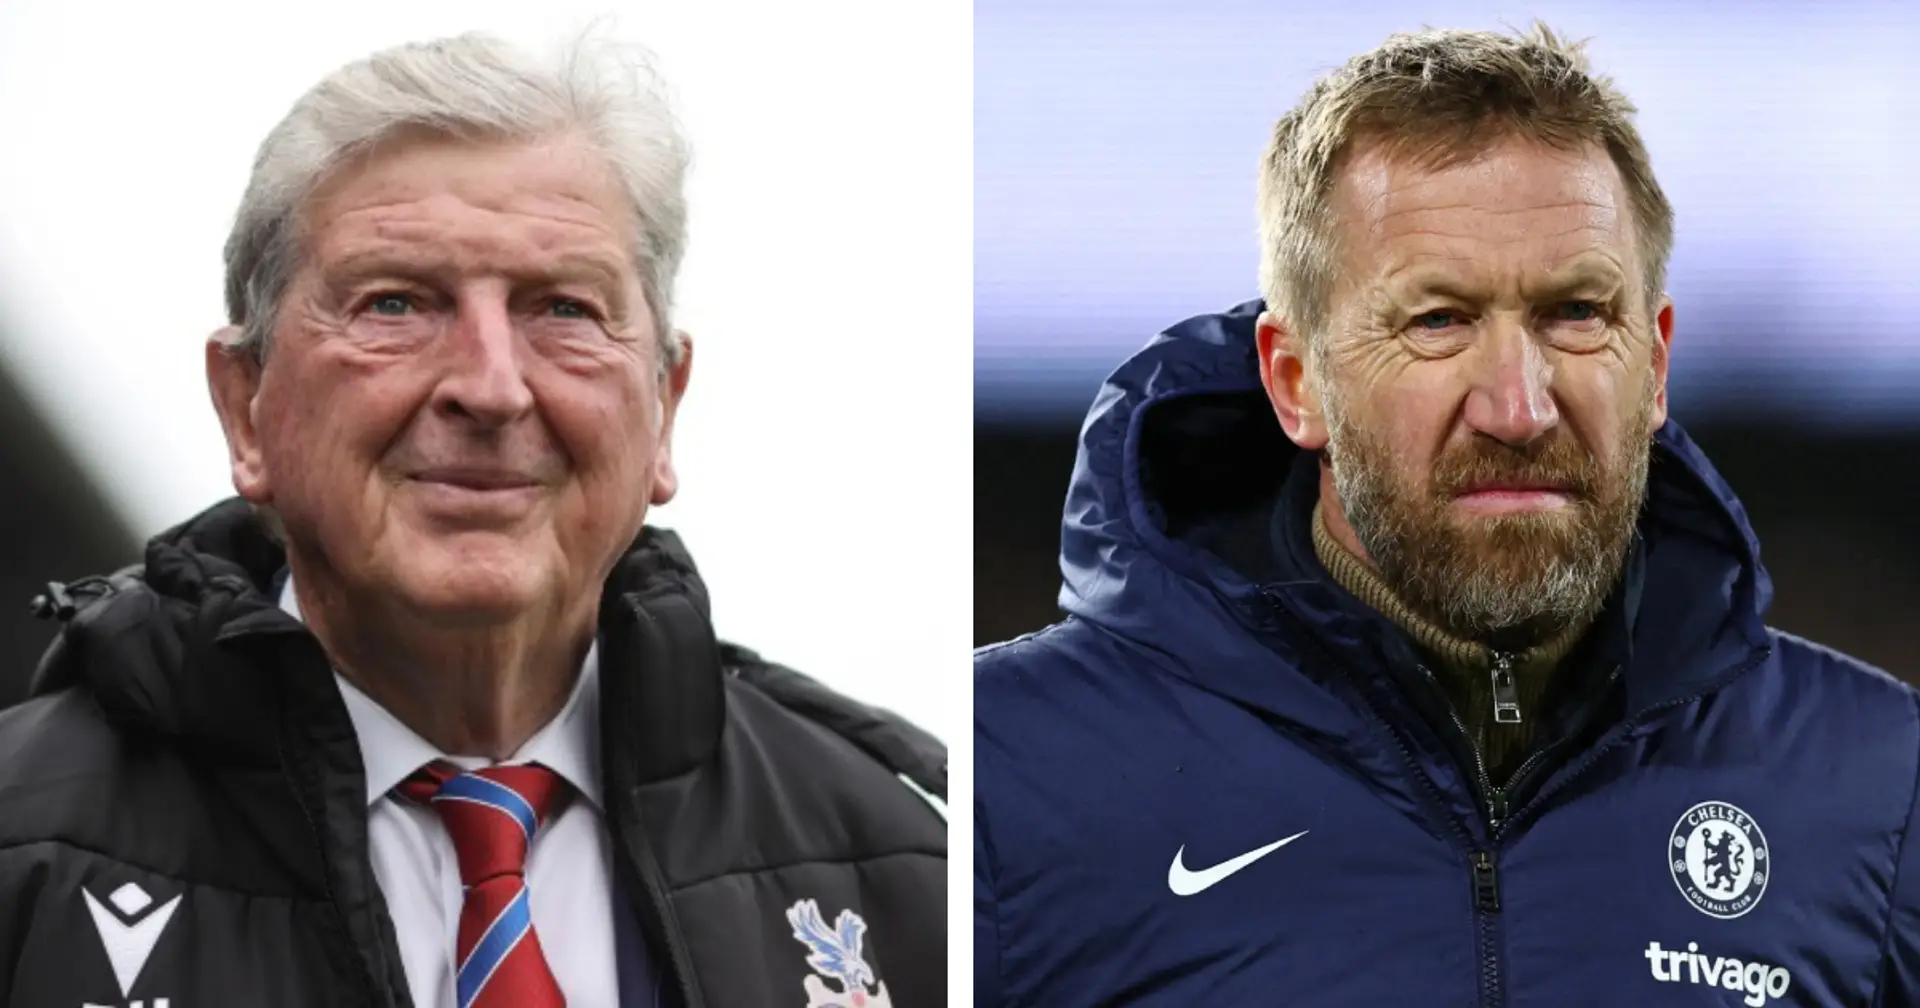 Roy Hodgson wants to stay at Crystal Palace, Graham Potter is an option for the Eagles as well